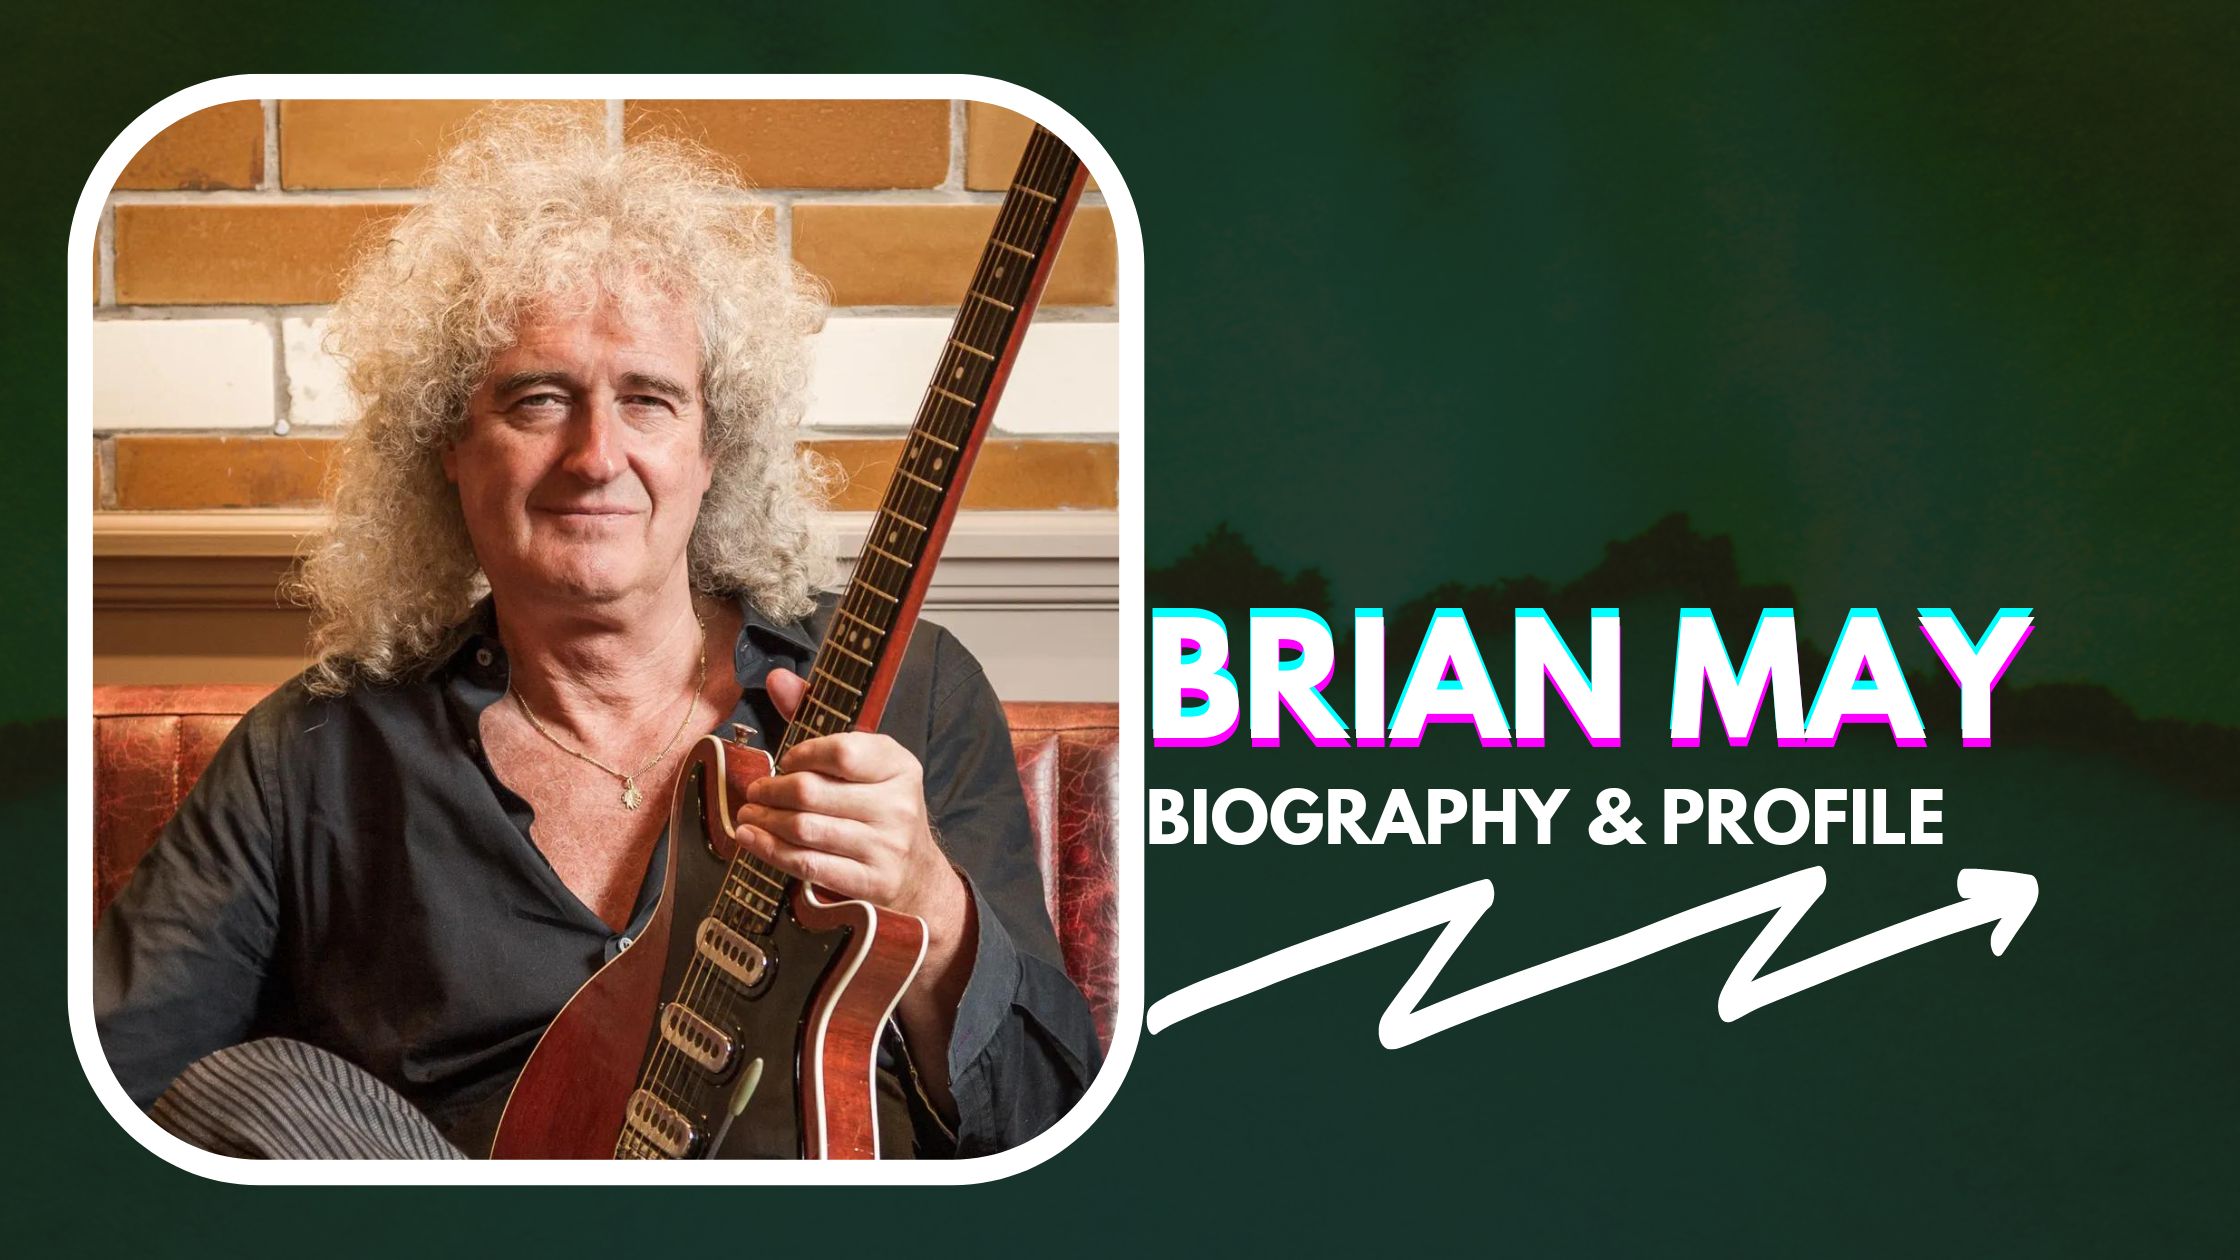 Brian May Net Worth and Biography